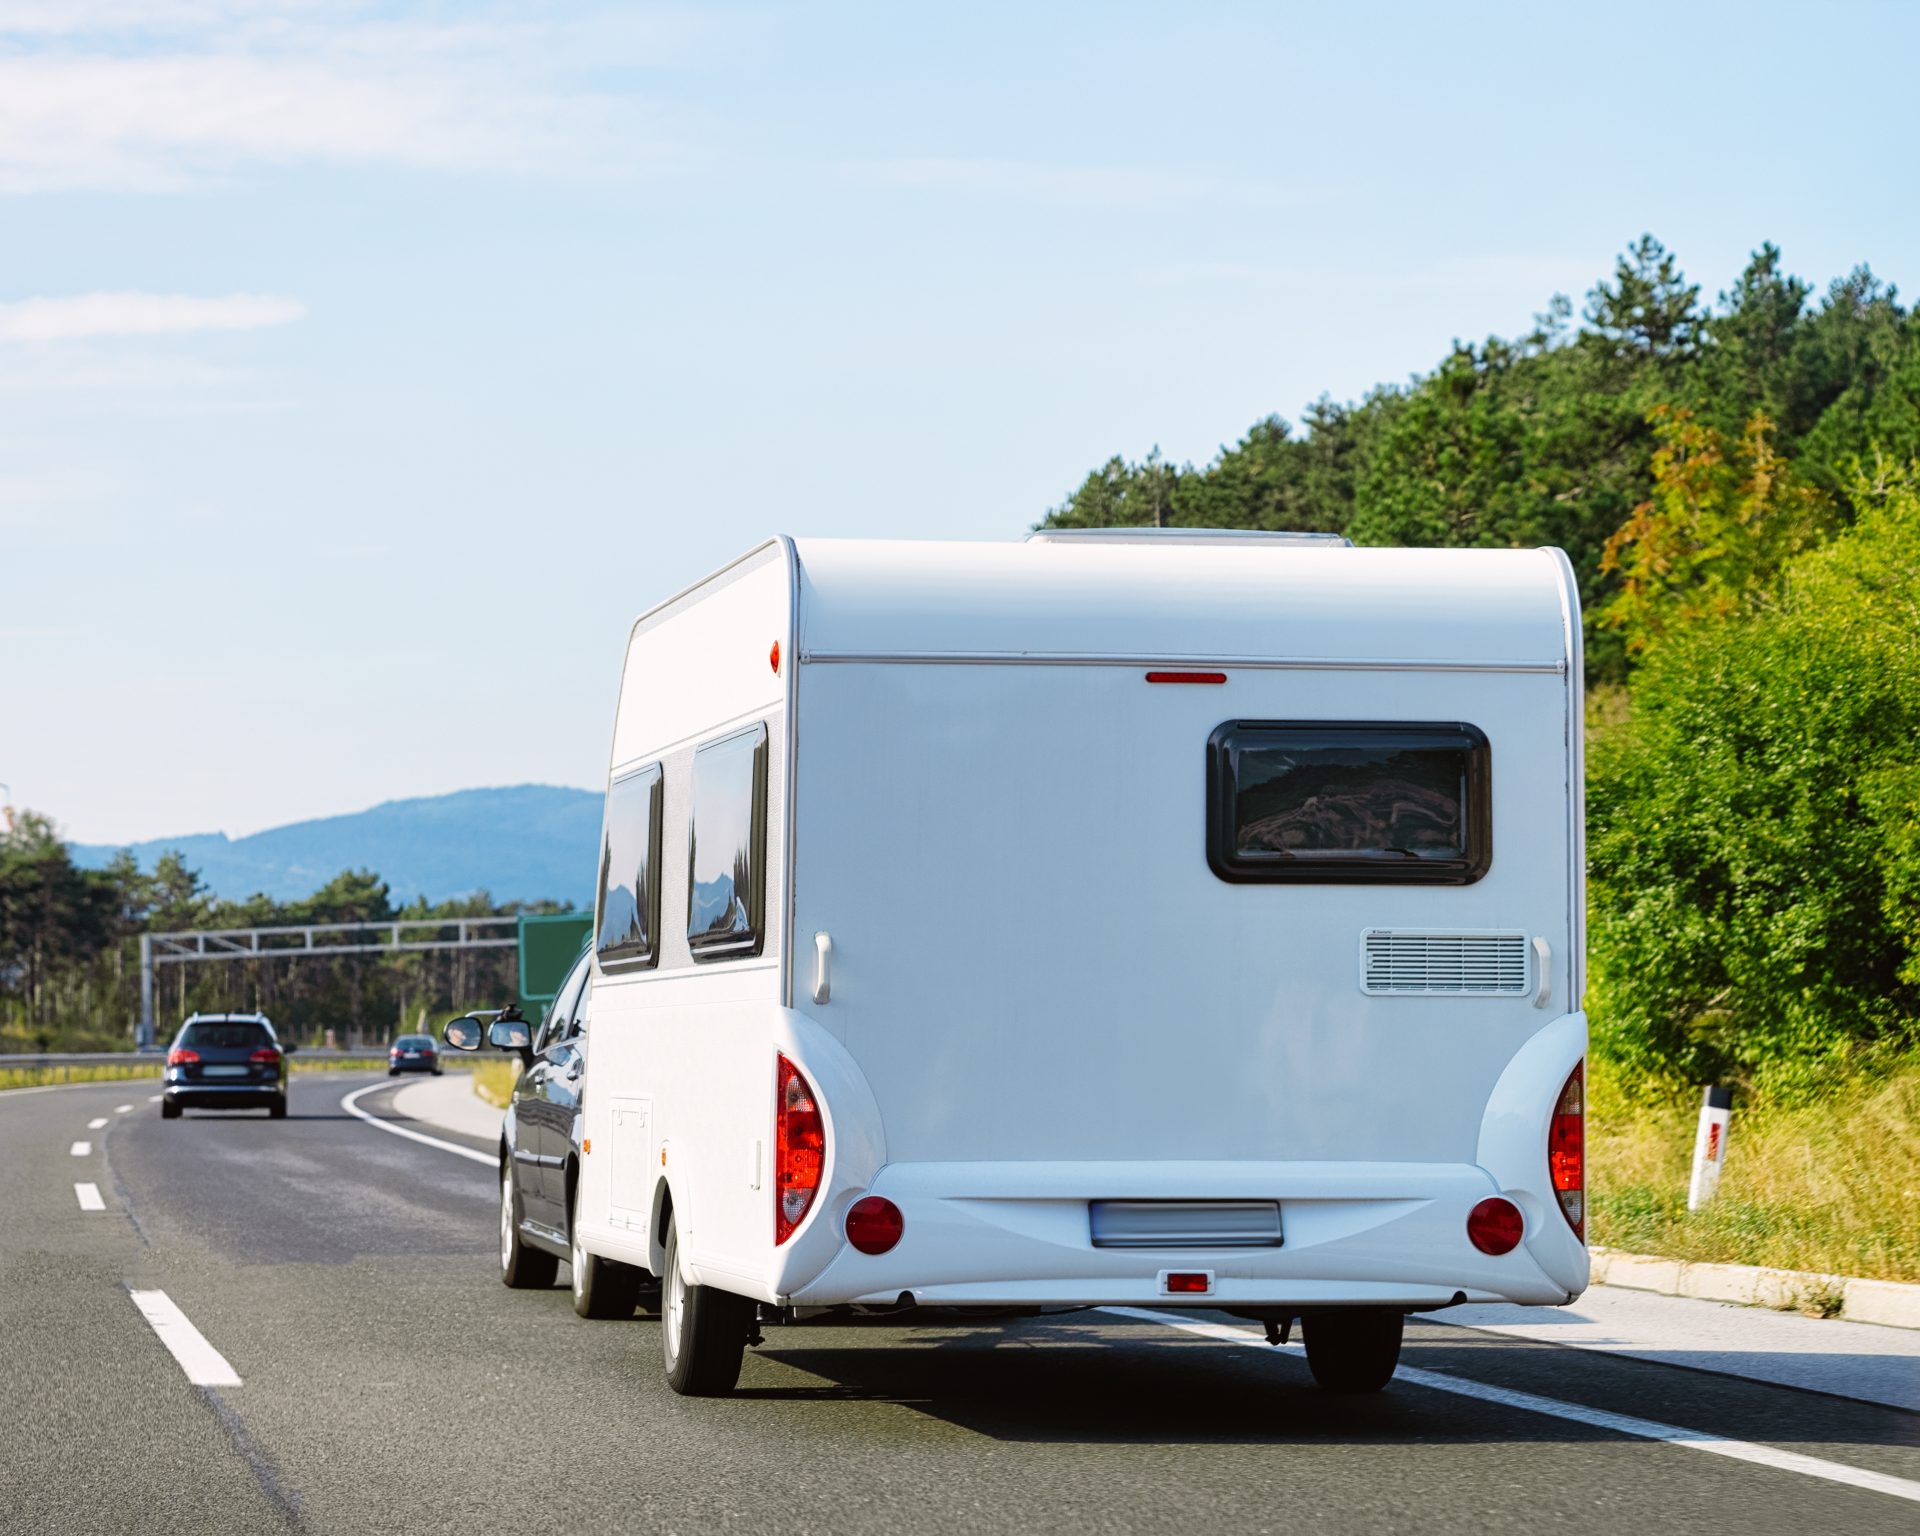 7 Reasons to Consider Full-time RV living